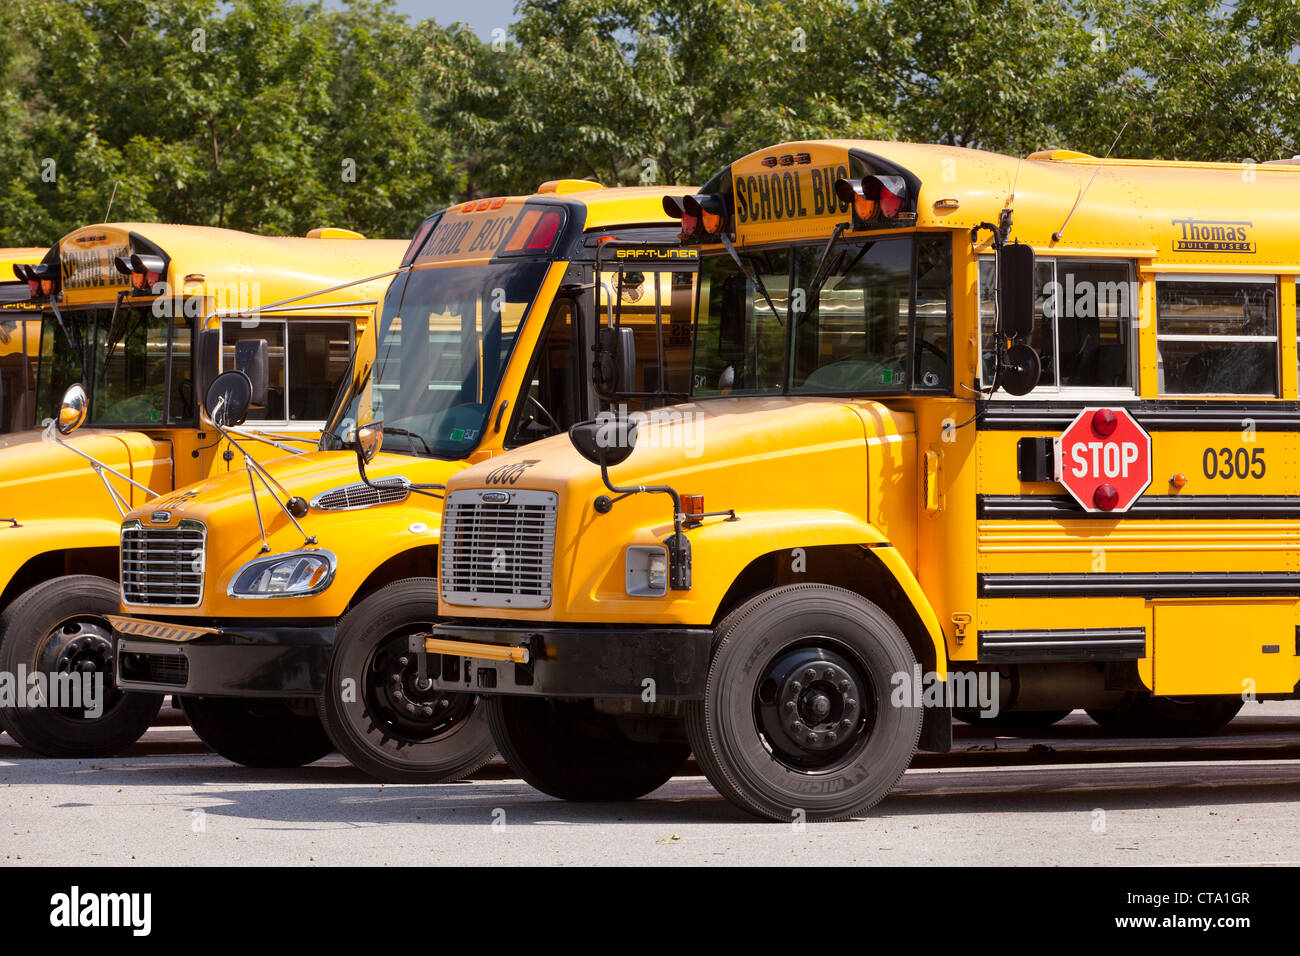 Parked school buses Stock Photo